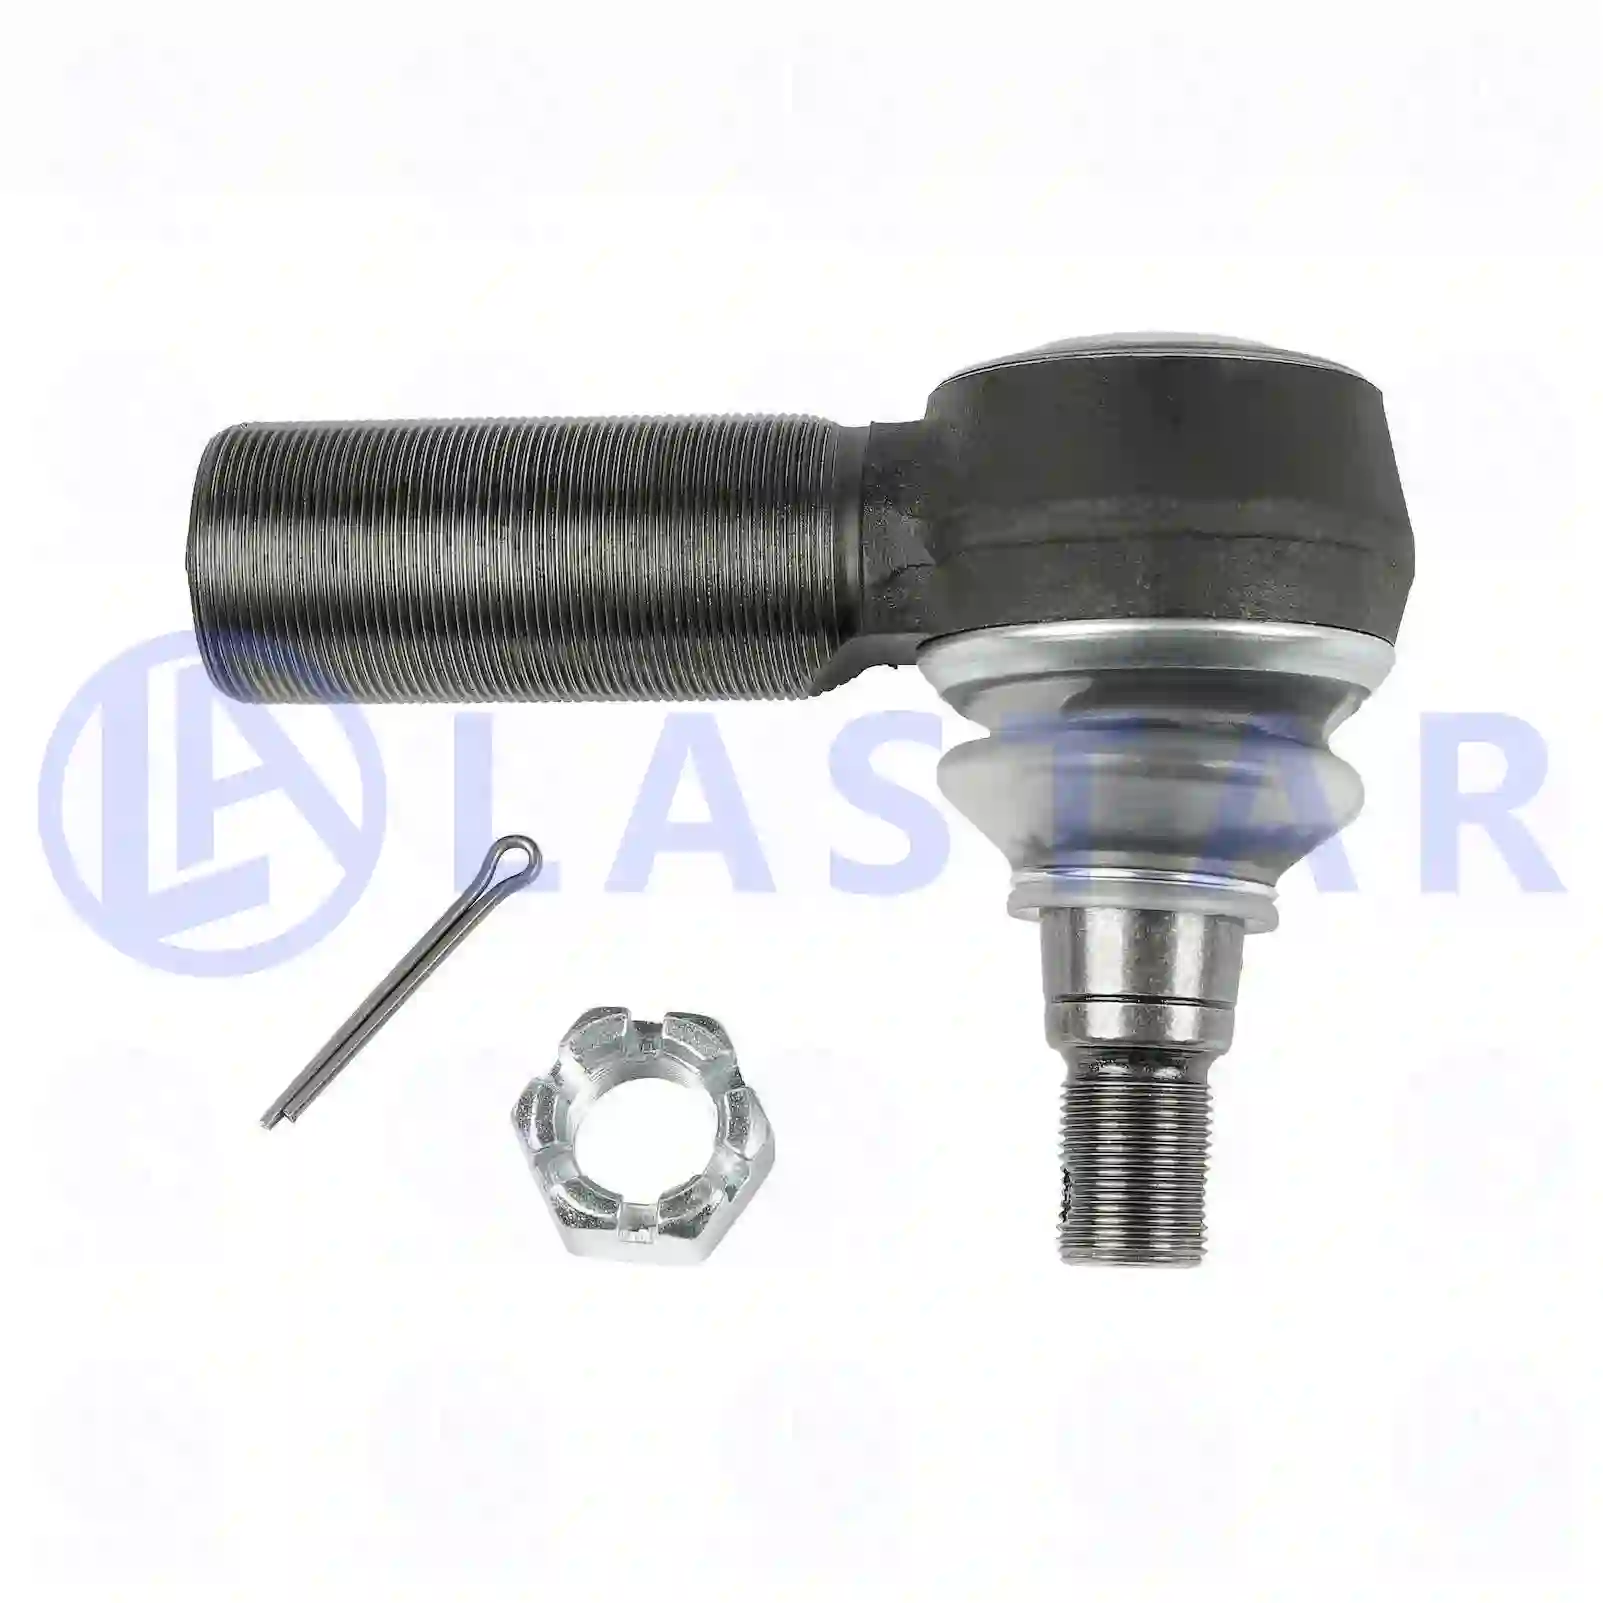 Ball joint, right hand thread, 77705174, 21448350, 3097999, 3986736, 85103625, 85104188, 85119942, ZG40380-0008 ||  77705174 Lastar Spare Part | Truck Spare Parts, Auotomotive Spare Parts Ball joint, right hand thread, 77705174, 21448350, 3097999, 3986736, 85103625, 85104188, 85119942, ZG40380-0008 ||  77705174 Lastar Spare Part | Truck Spare Parts, Auotomotive Spare Parts